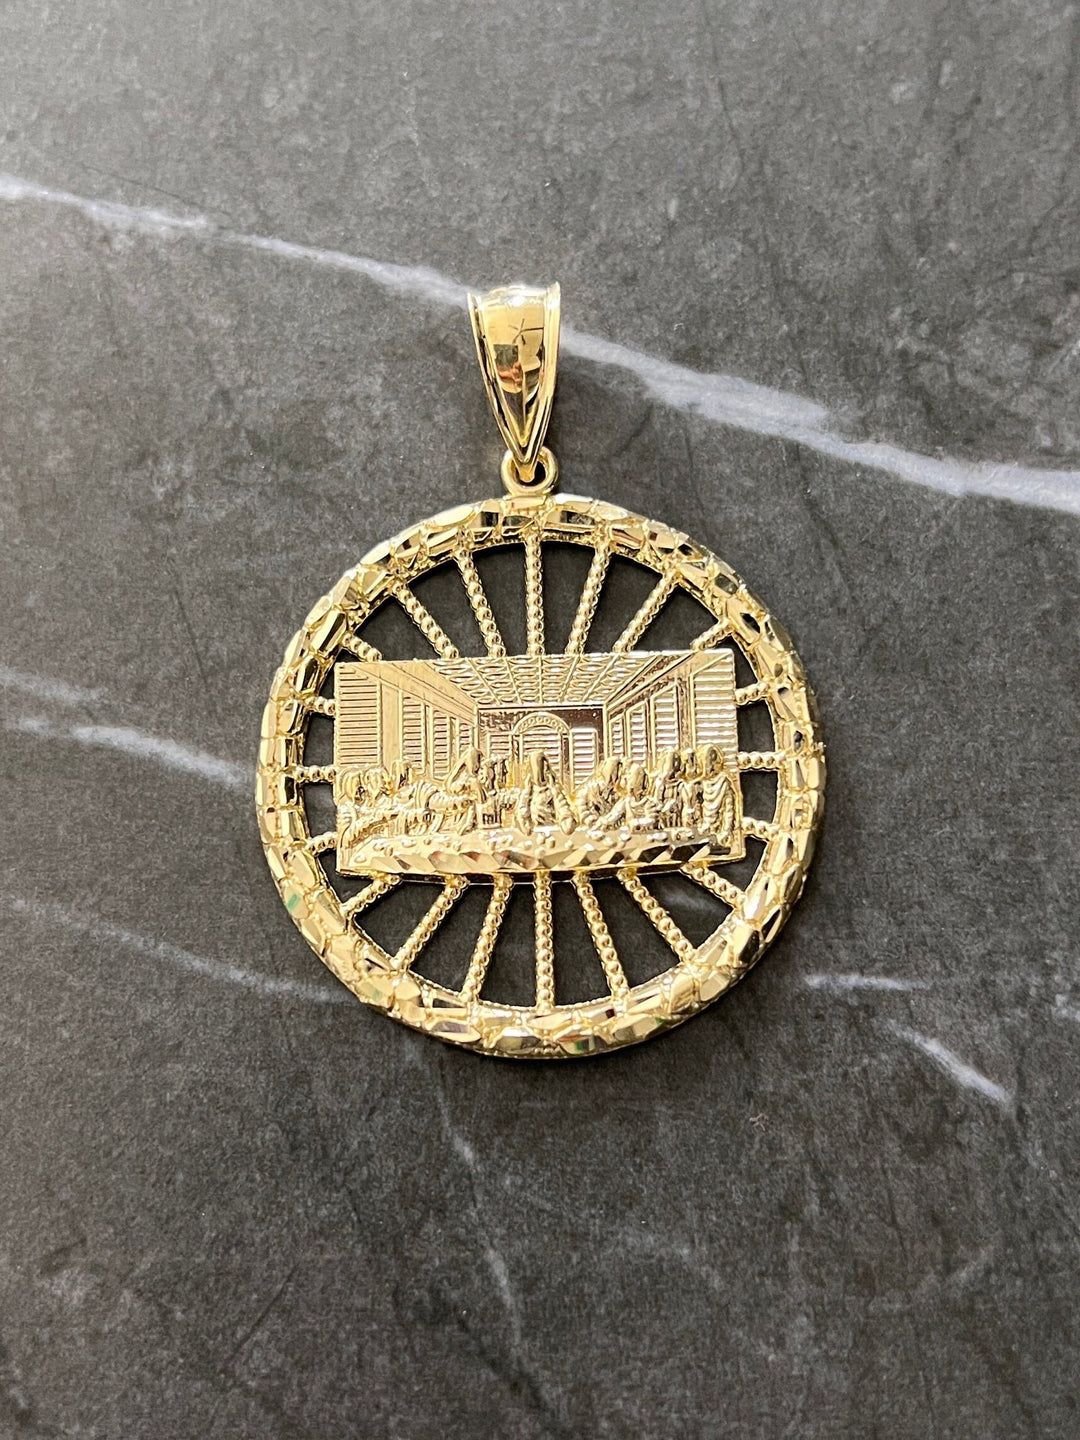 Authentic 10K Yellow Gold Last Supper Wheel Diamond Cut Nugget Style Real Gold Pendant/Charm, 10K Jesus with Disciples on Last Supper Wheel